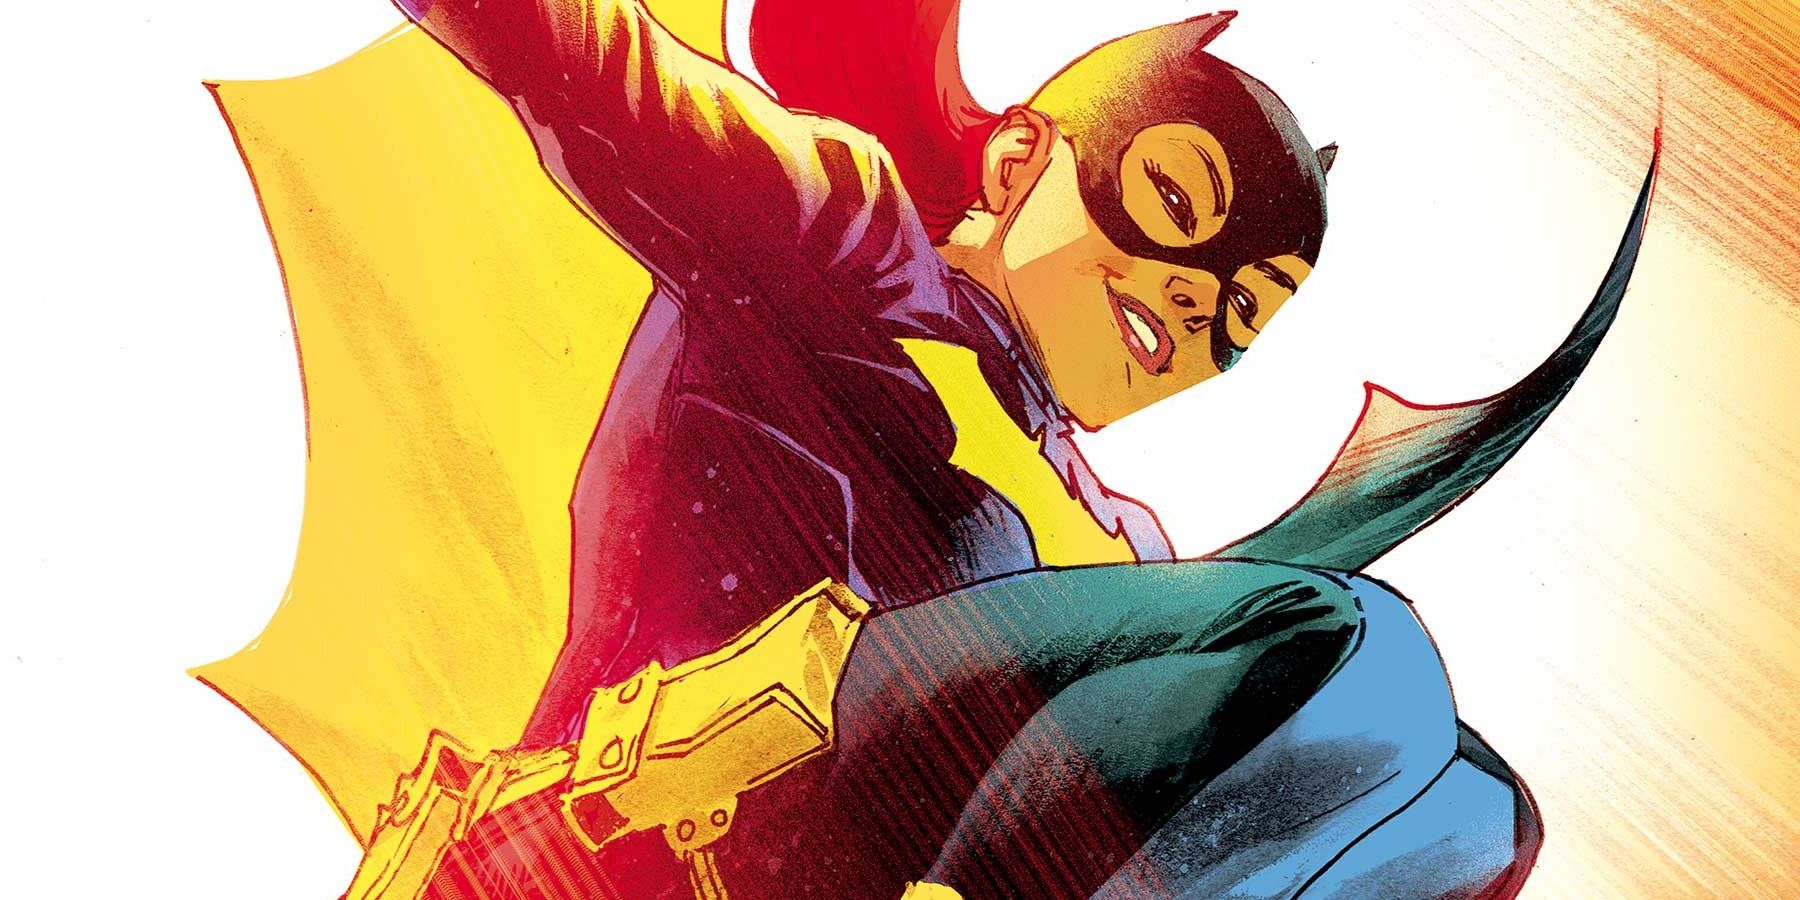 Batgirl leaps into the air in DC Comics.